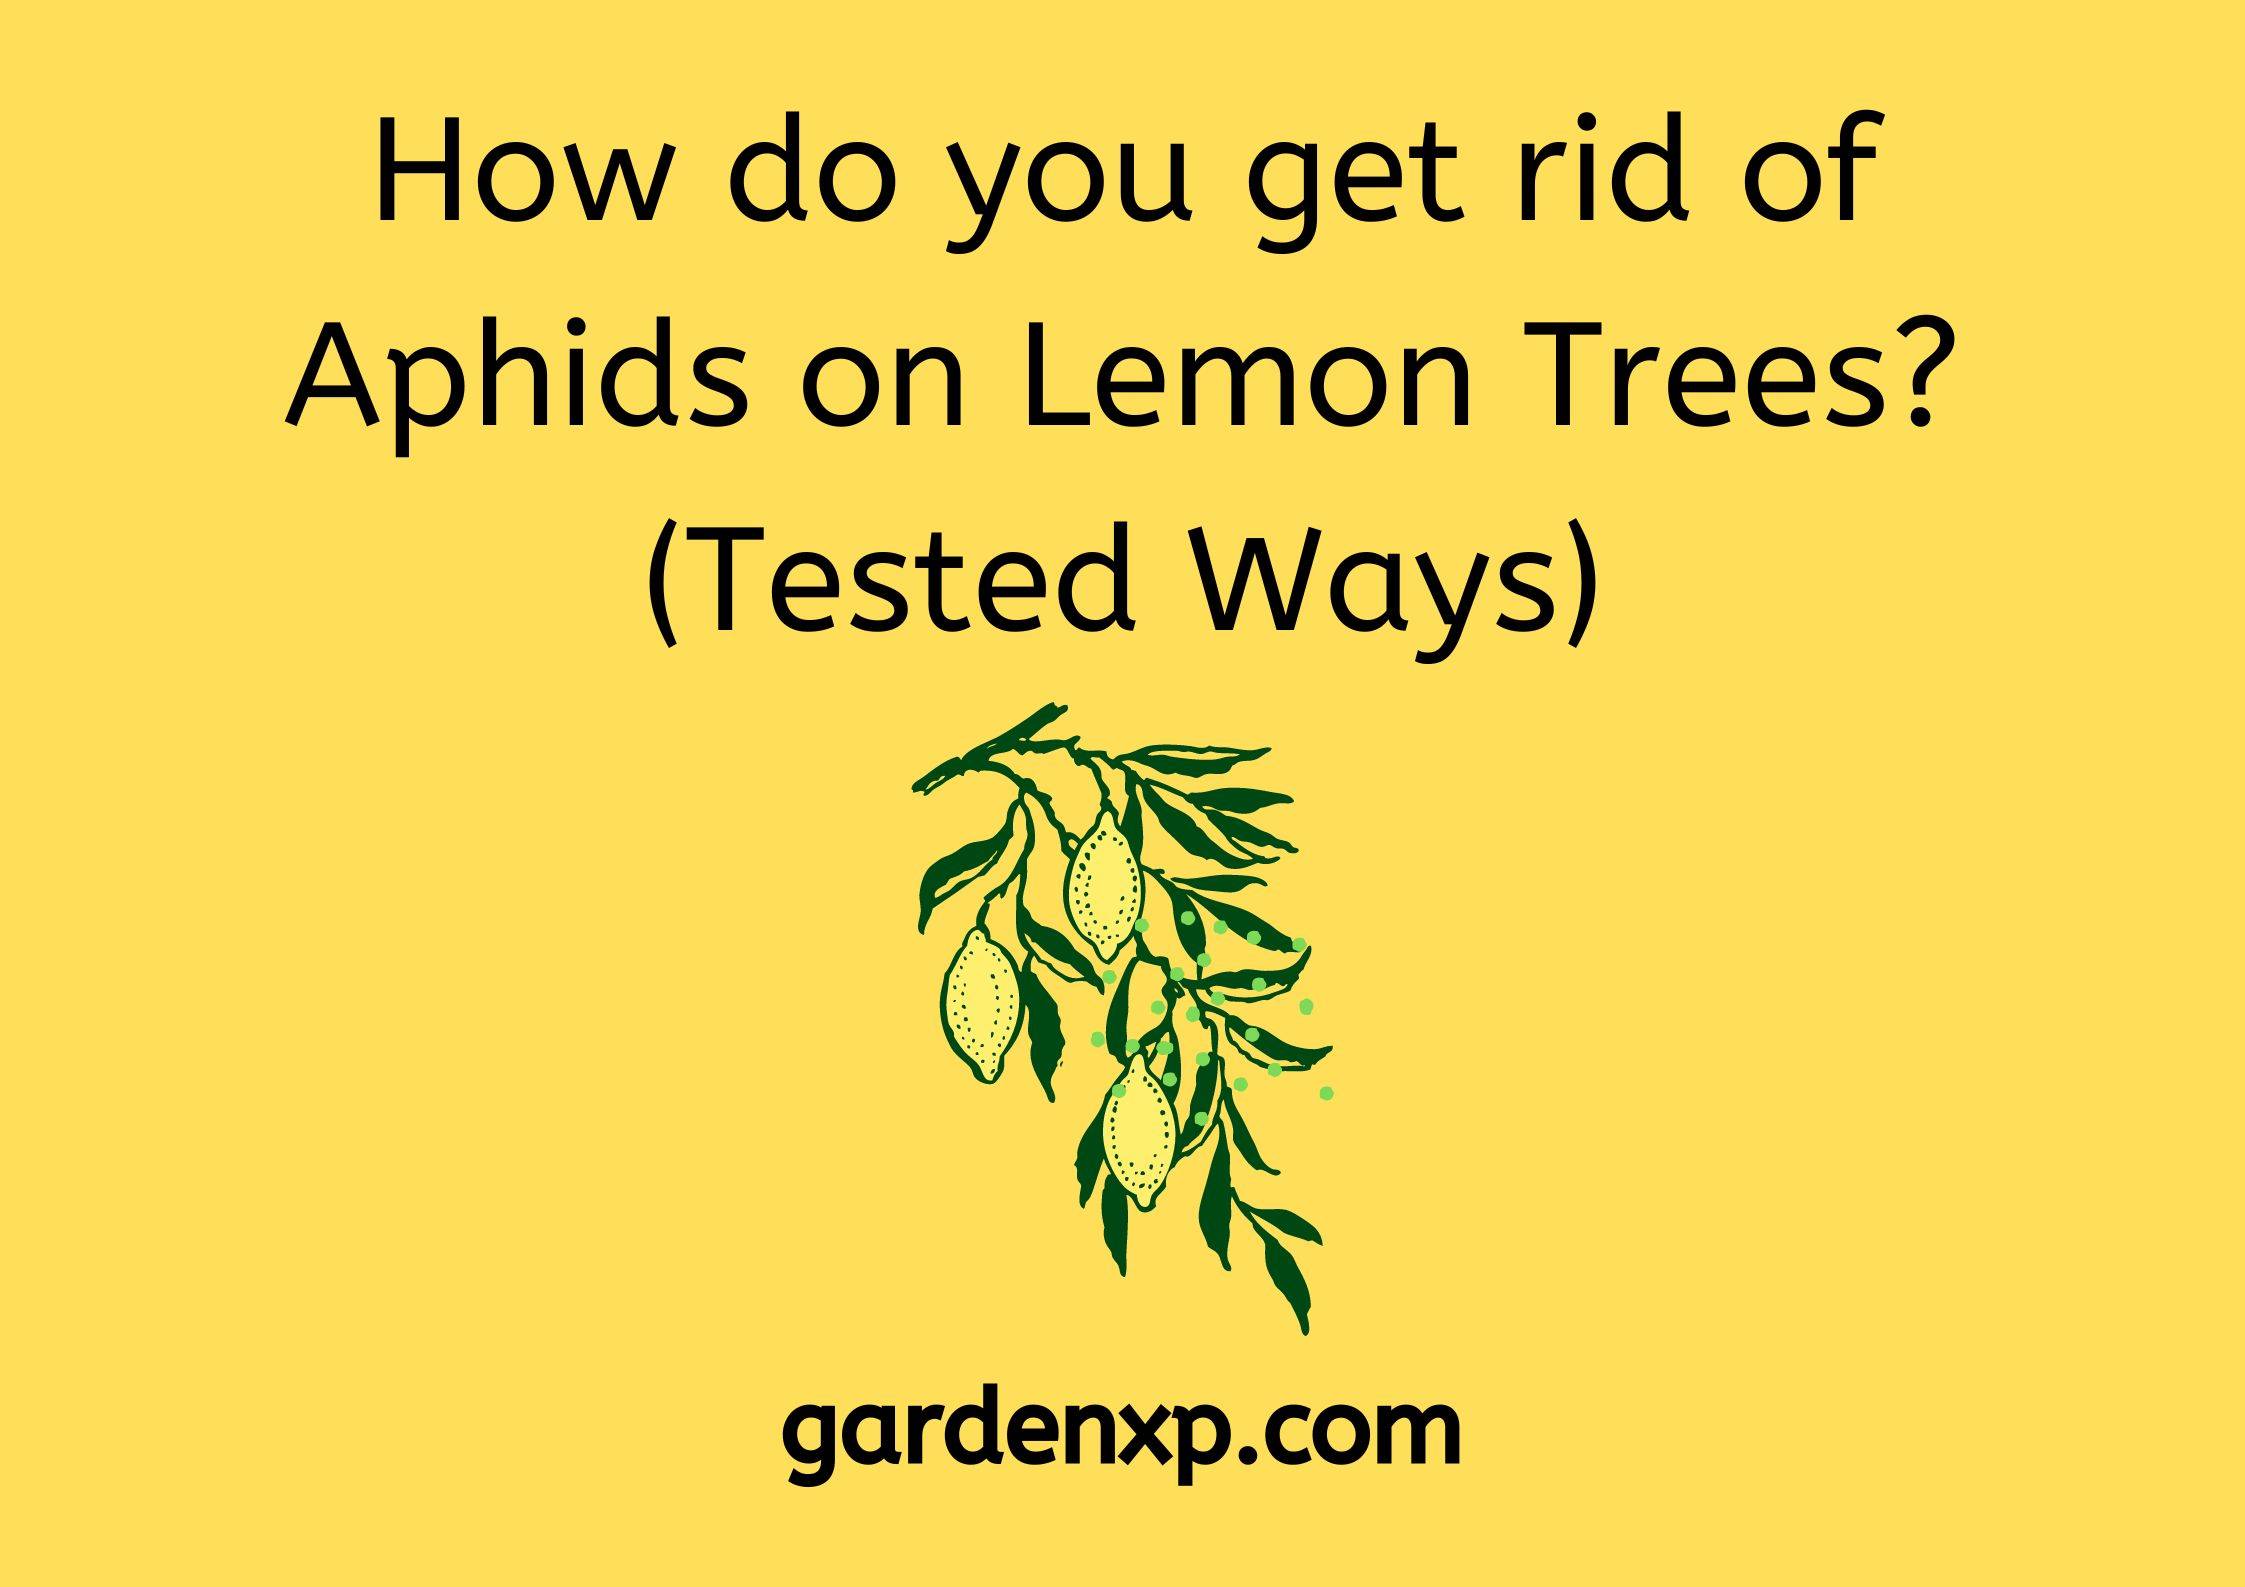 How do you get rid of Aphids on Lemon Trees? (Tested Ways)